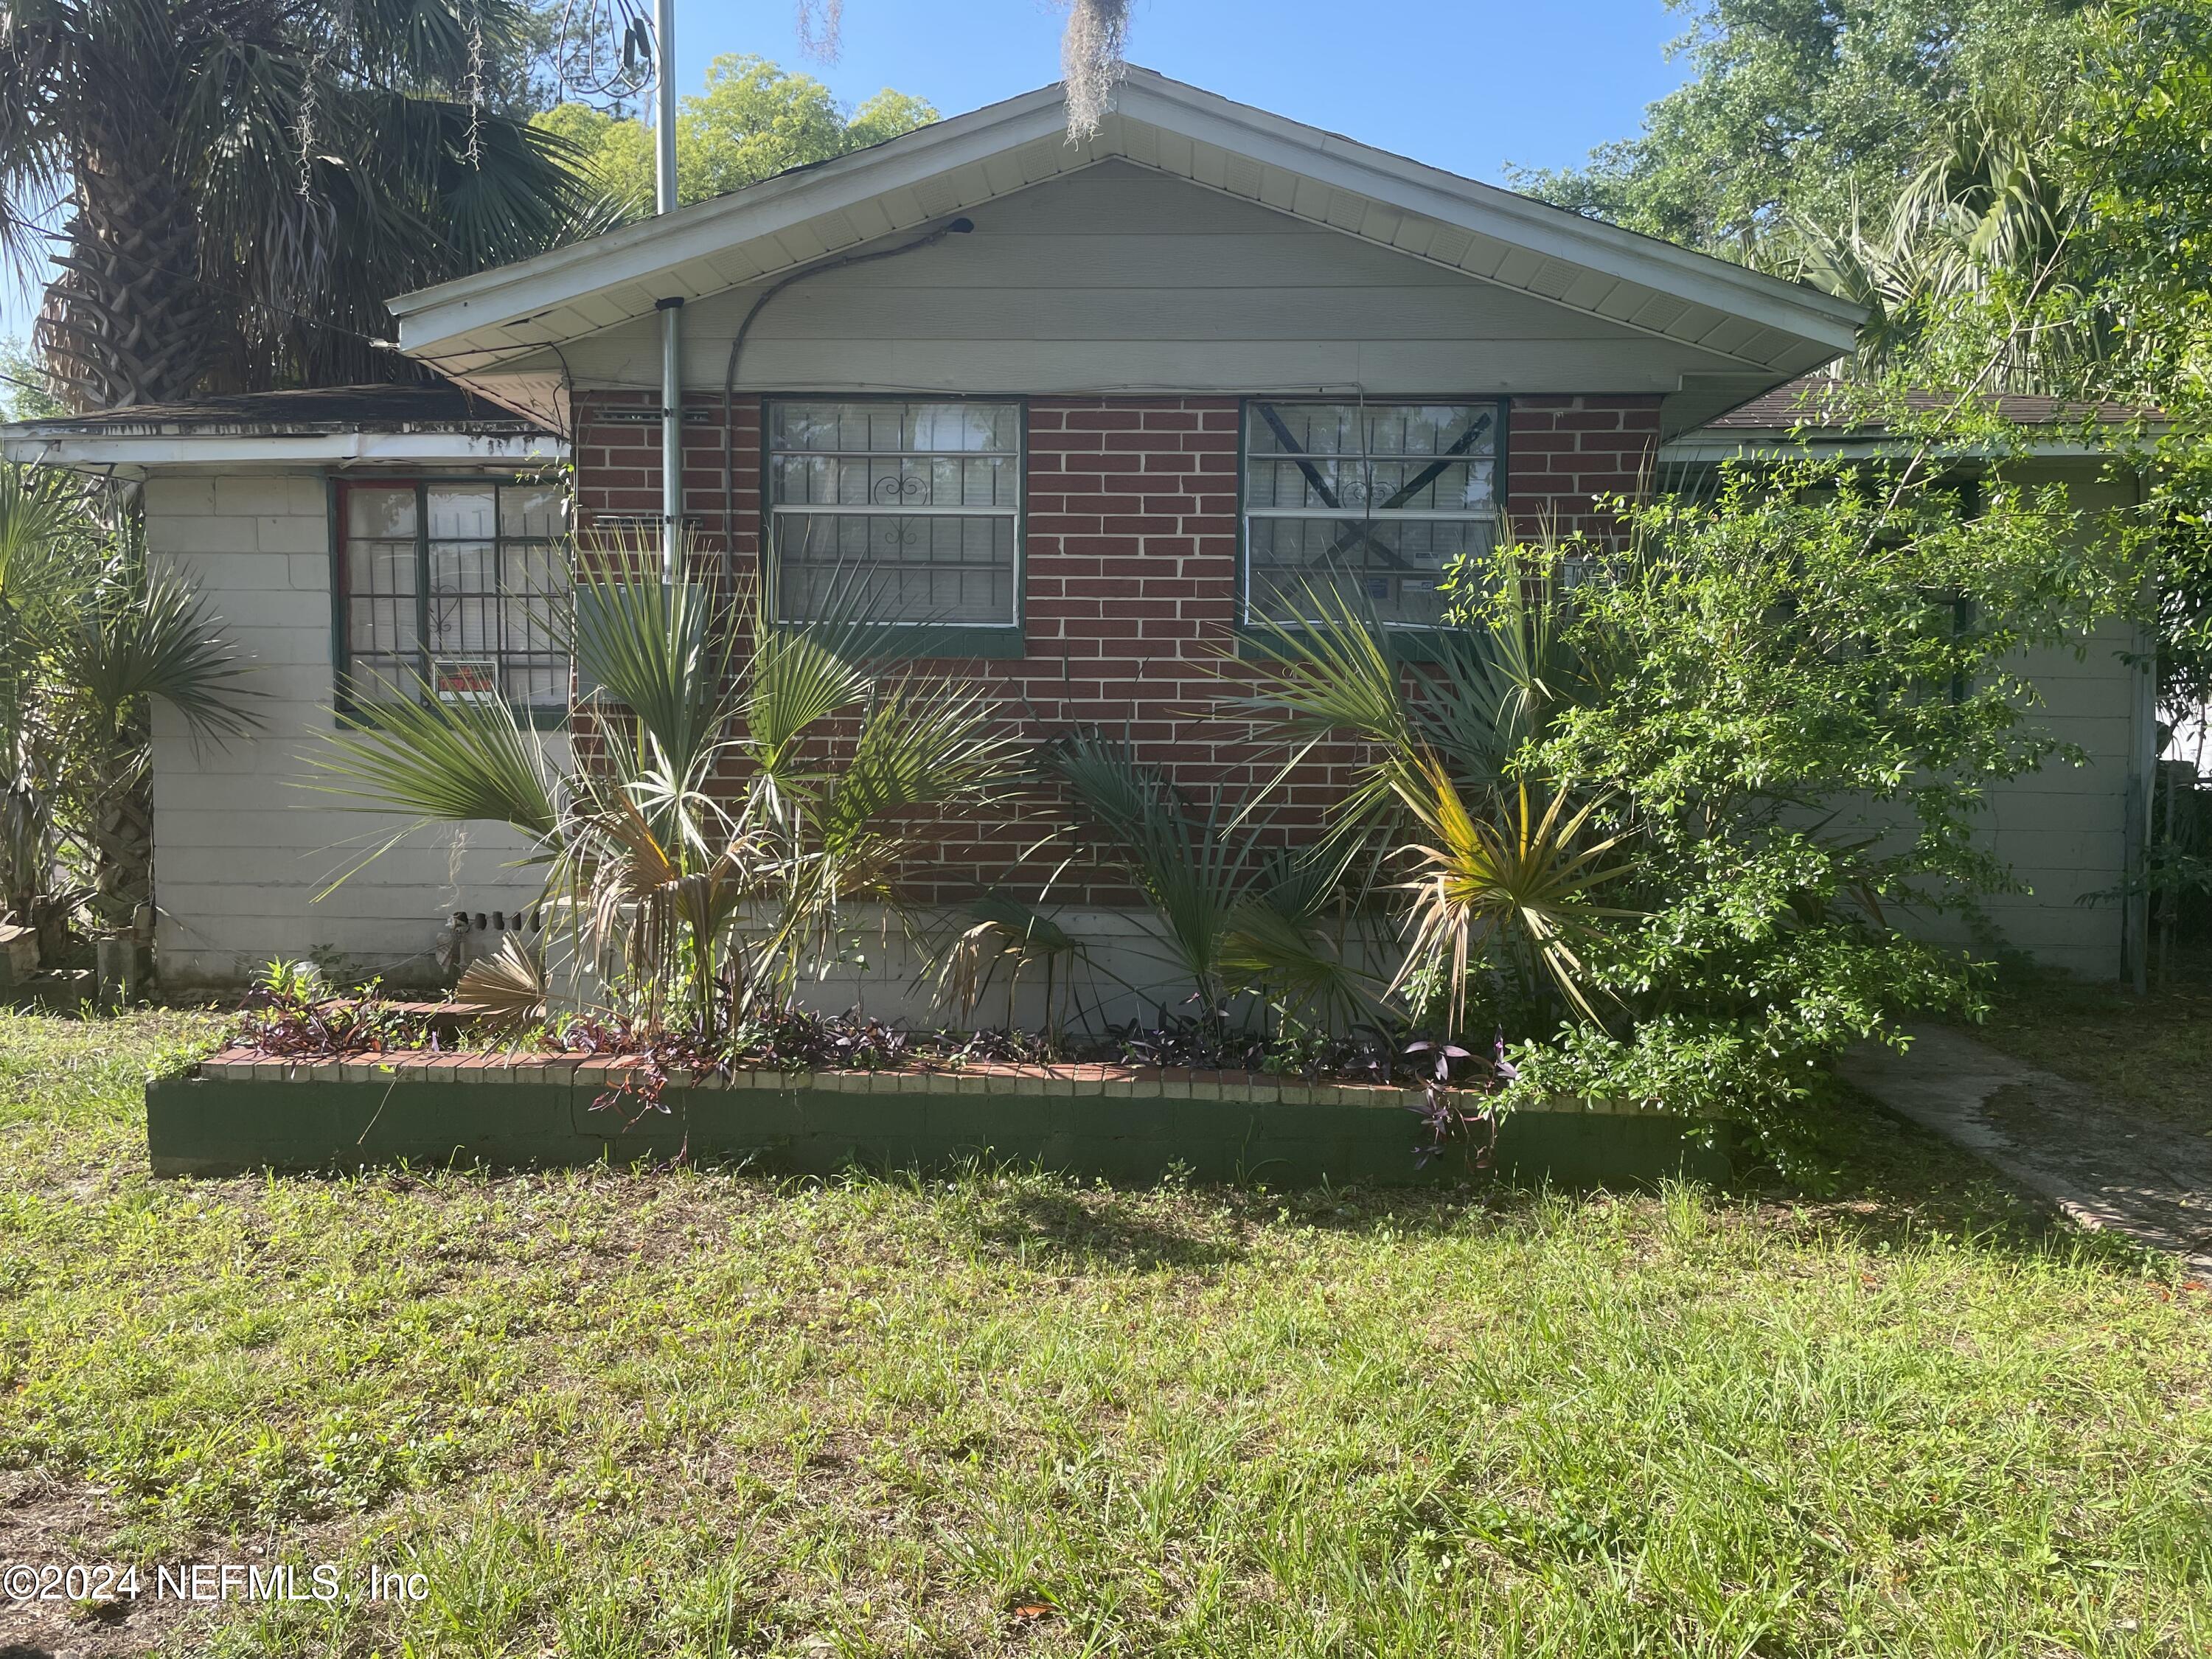 Jacksonville, FL home for sale located at 1610 W 36th Street, Jacksonville, FL 32209